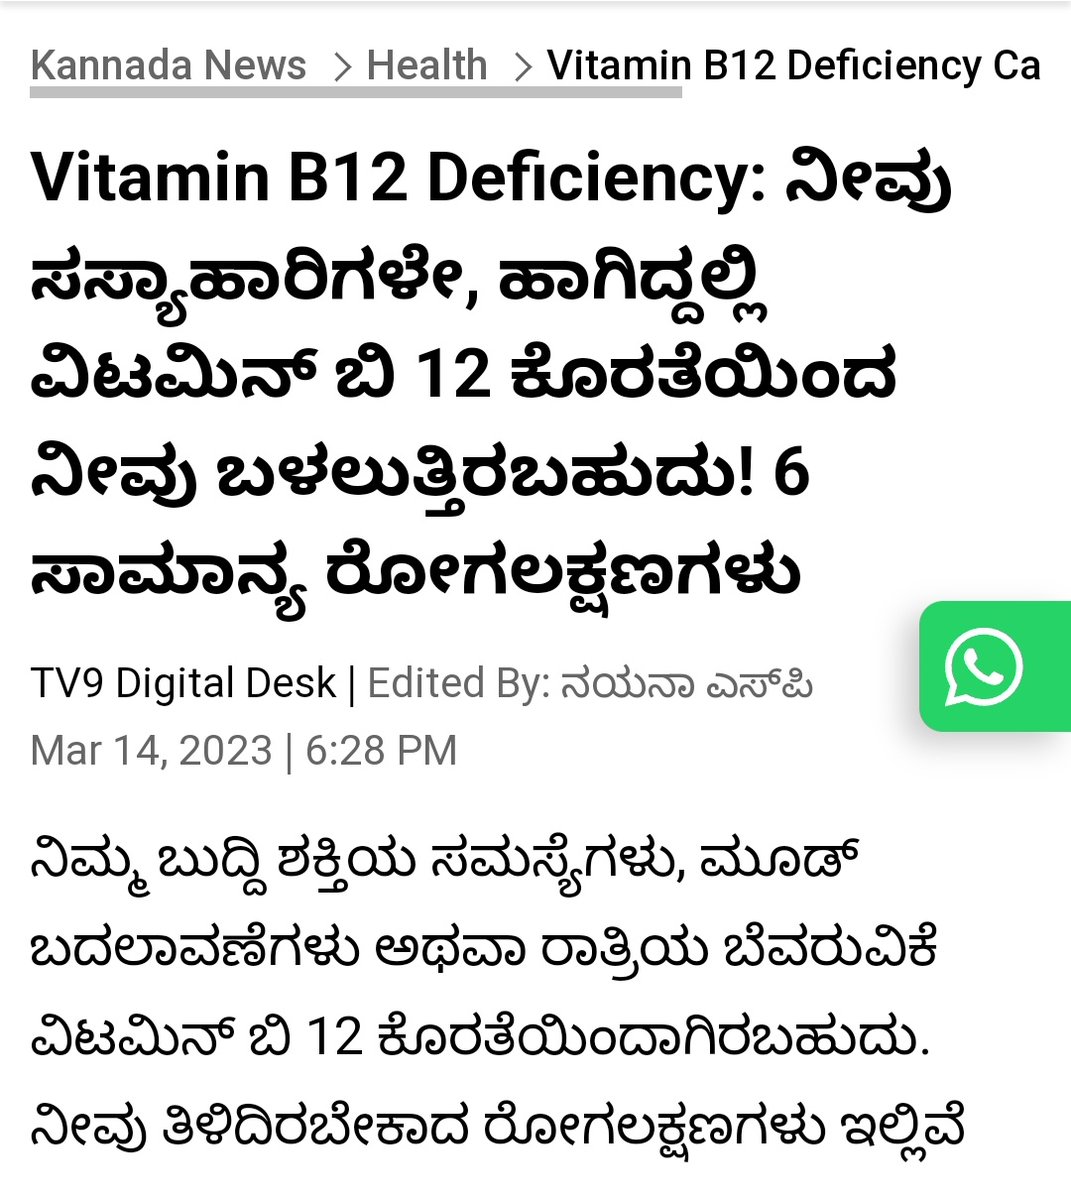 People with vitamin B12 deficiency experience mood swings, imbalance & memory problems. If you can't remember where you put your keys or wallet, it's due to low vitamin B12 levels. If so, consult a doctor immediately.

South India 
#MedTwitter
#mbbs 
#FOAMed 
#NutritionEducation